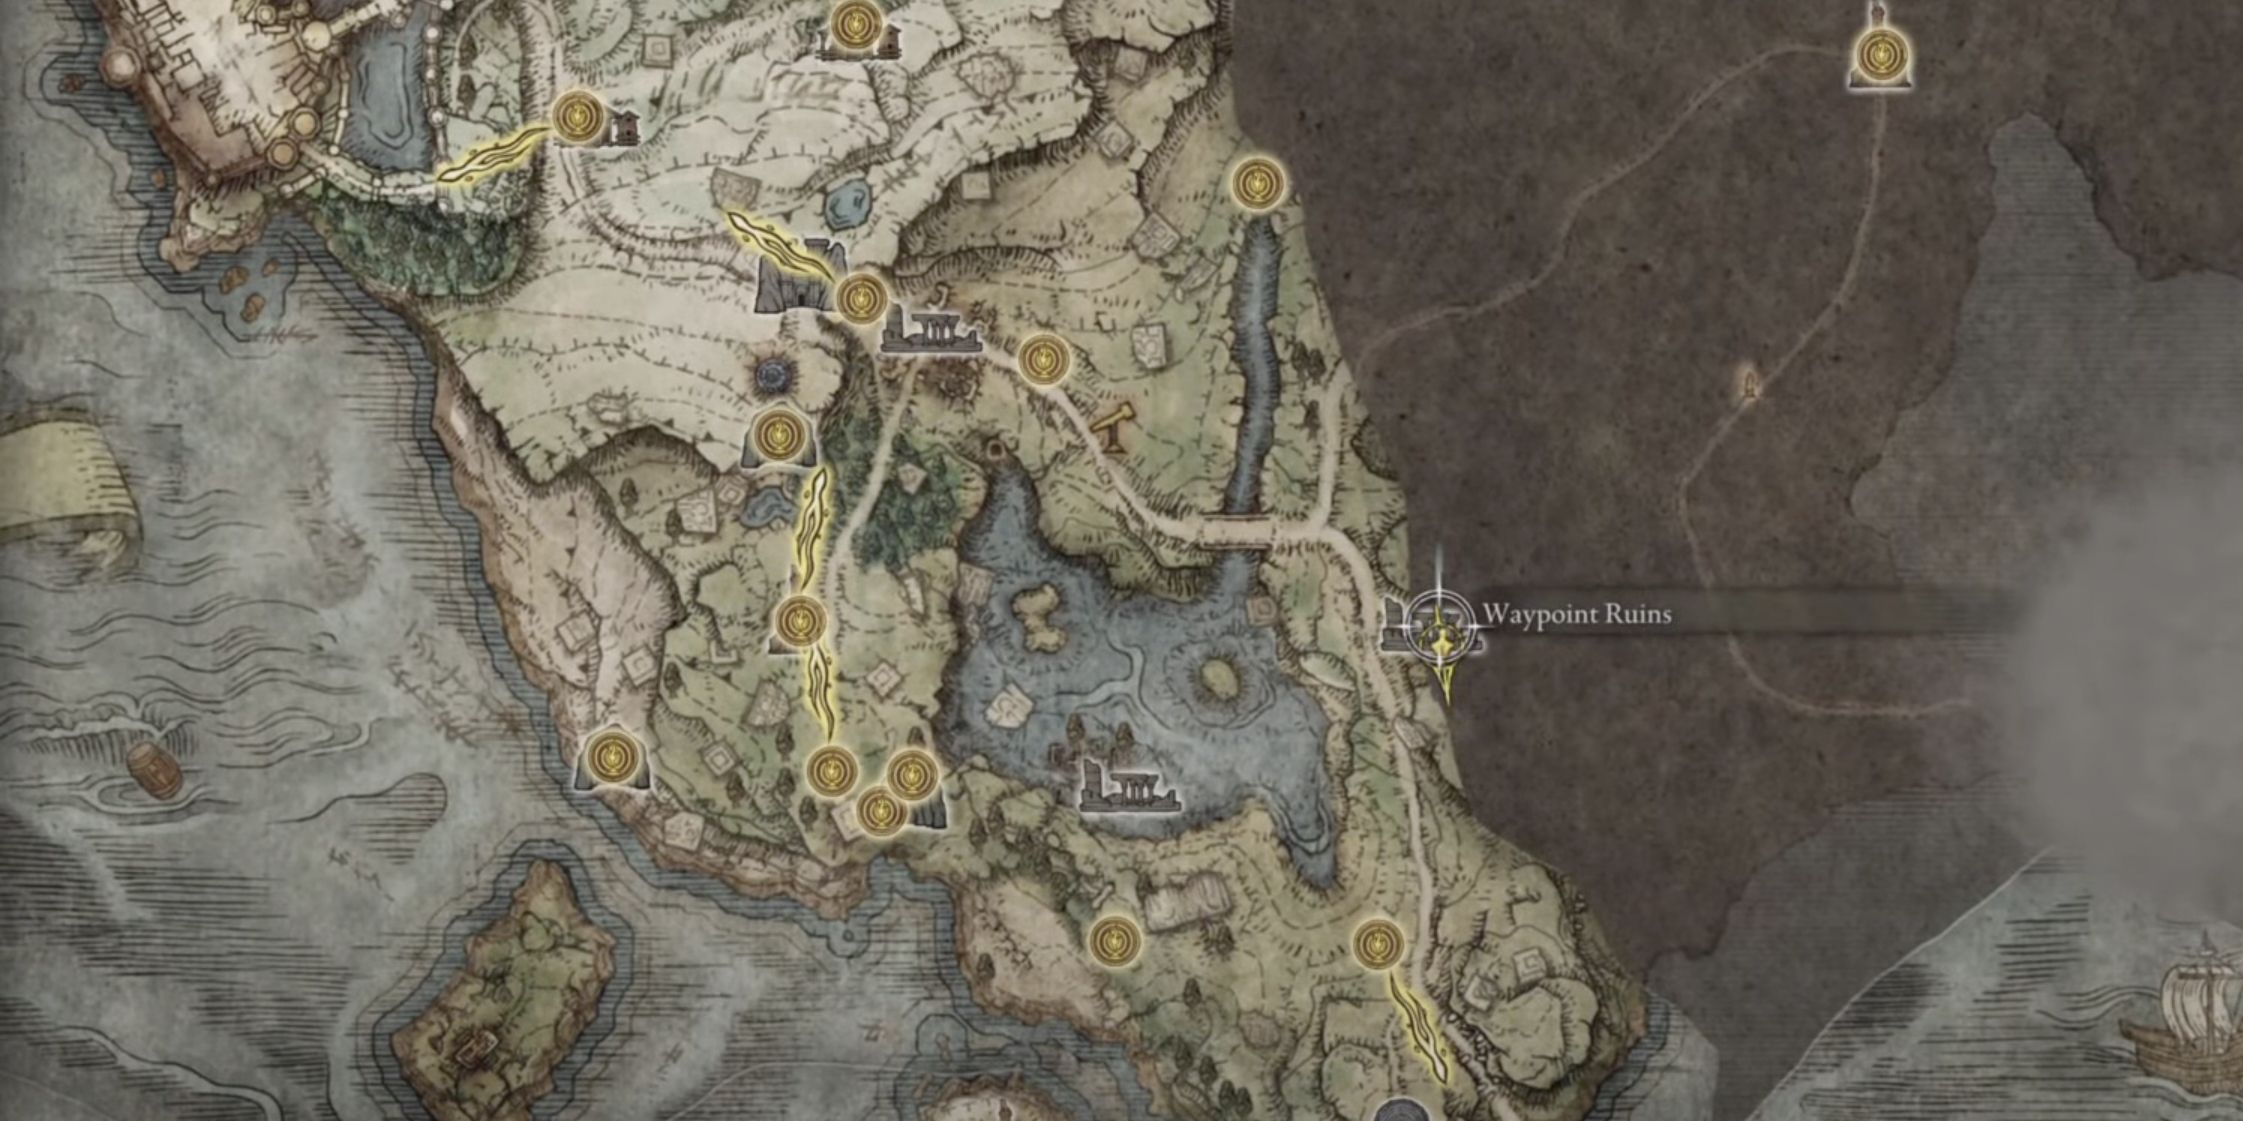 Elden Ring's Limgrave Map can be expanded by discovering fragments